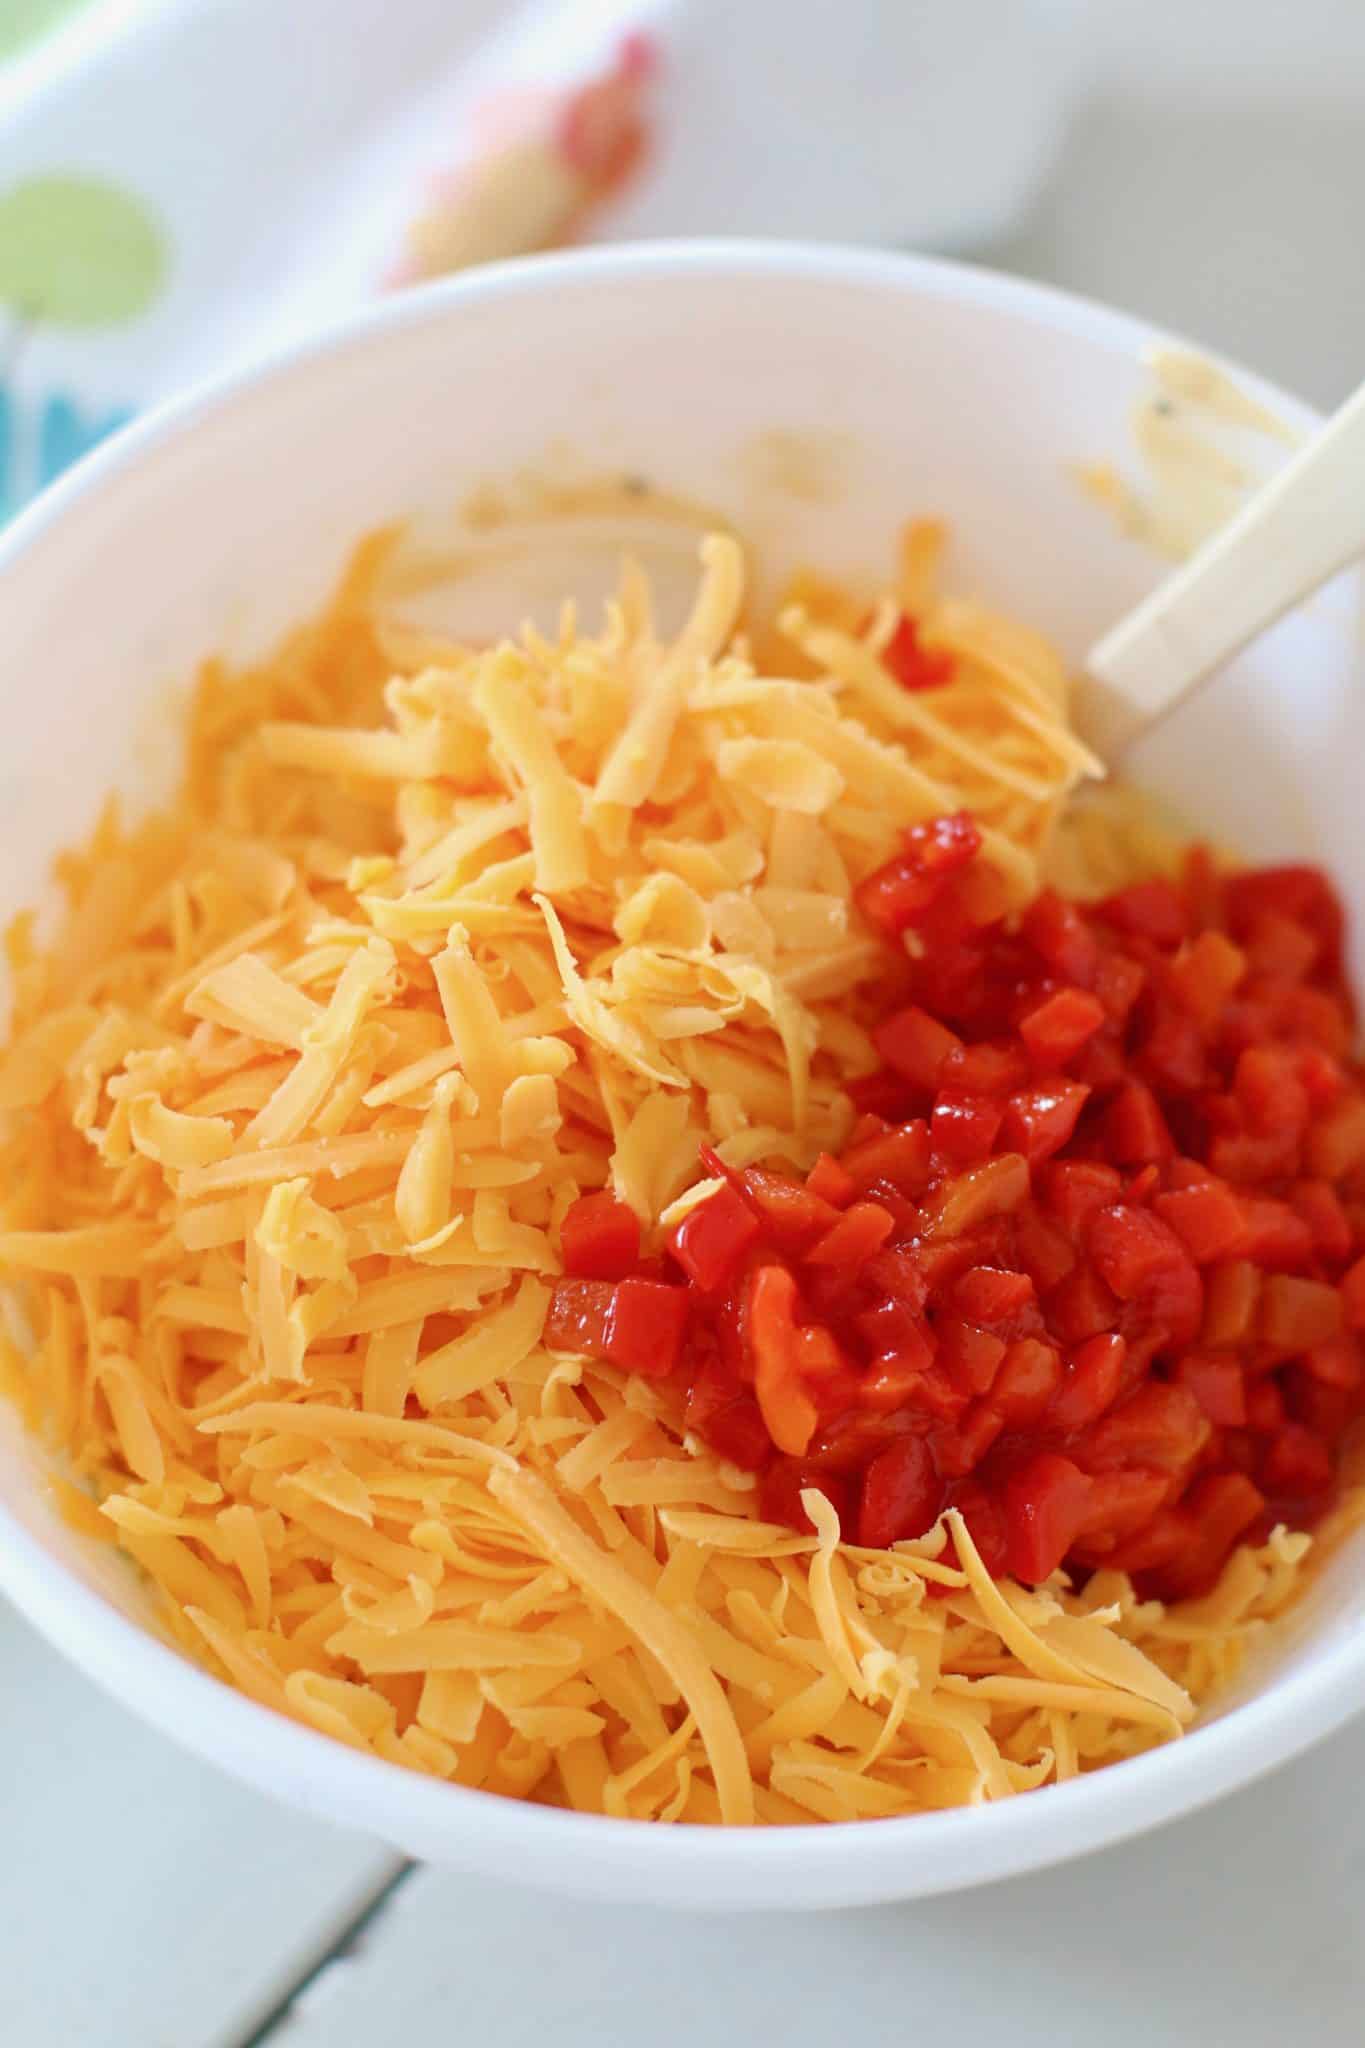 shredded cheddar cheese and diced pimentos added to cream cheese mixture in a white bowl.